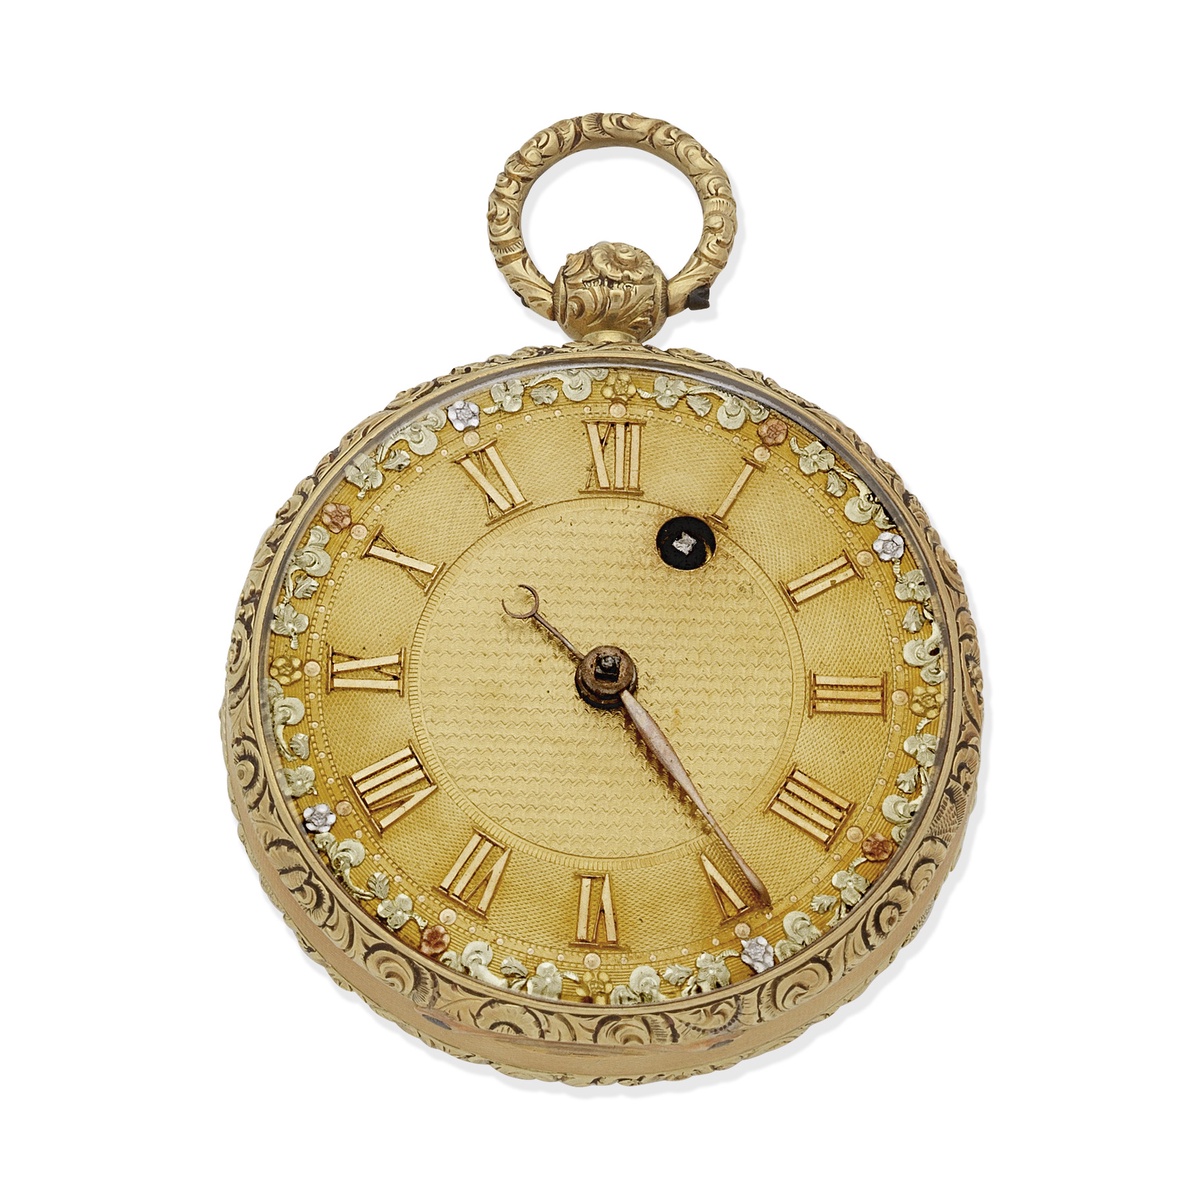 The Timeless Elegance of Gold Pocket Watches